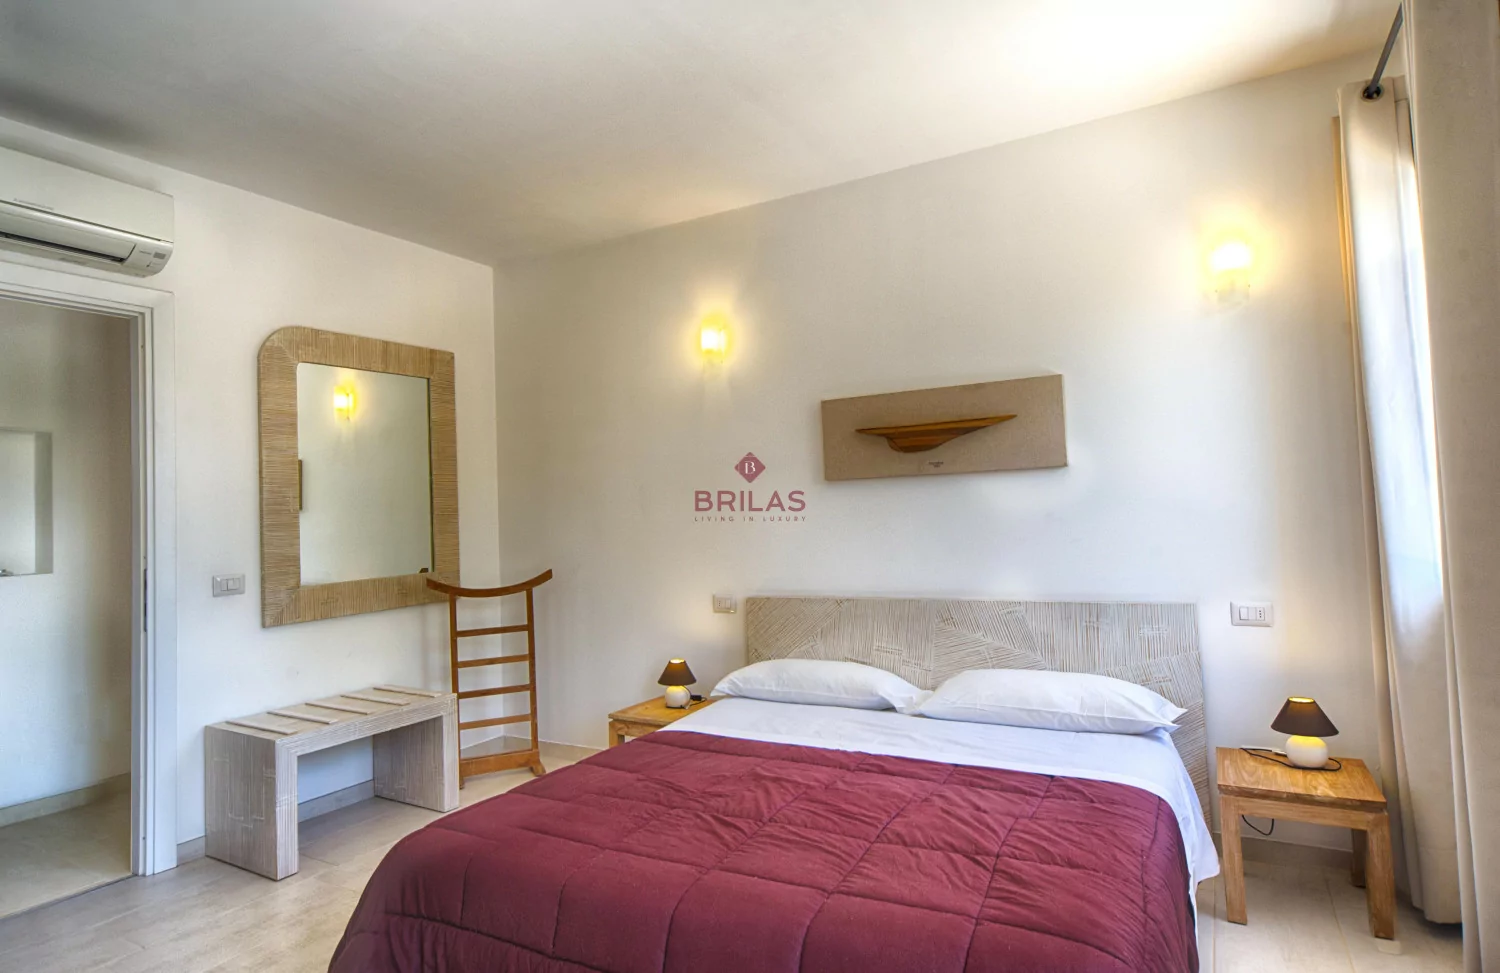  Bed and Breakfast in centro Olbia